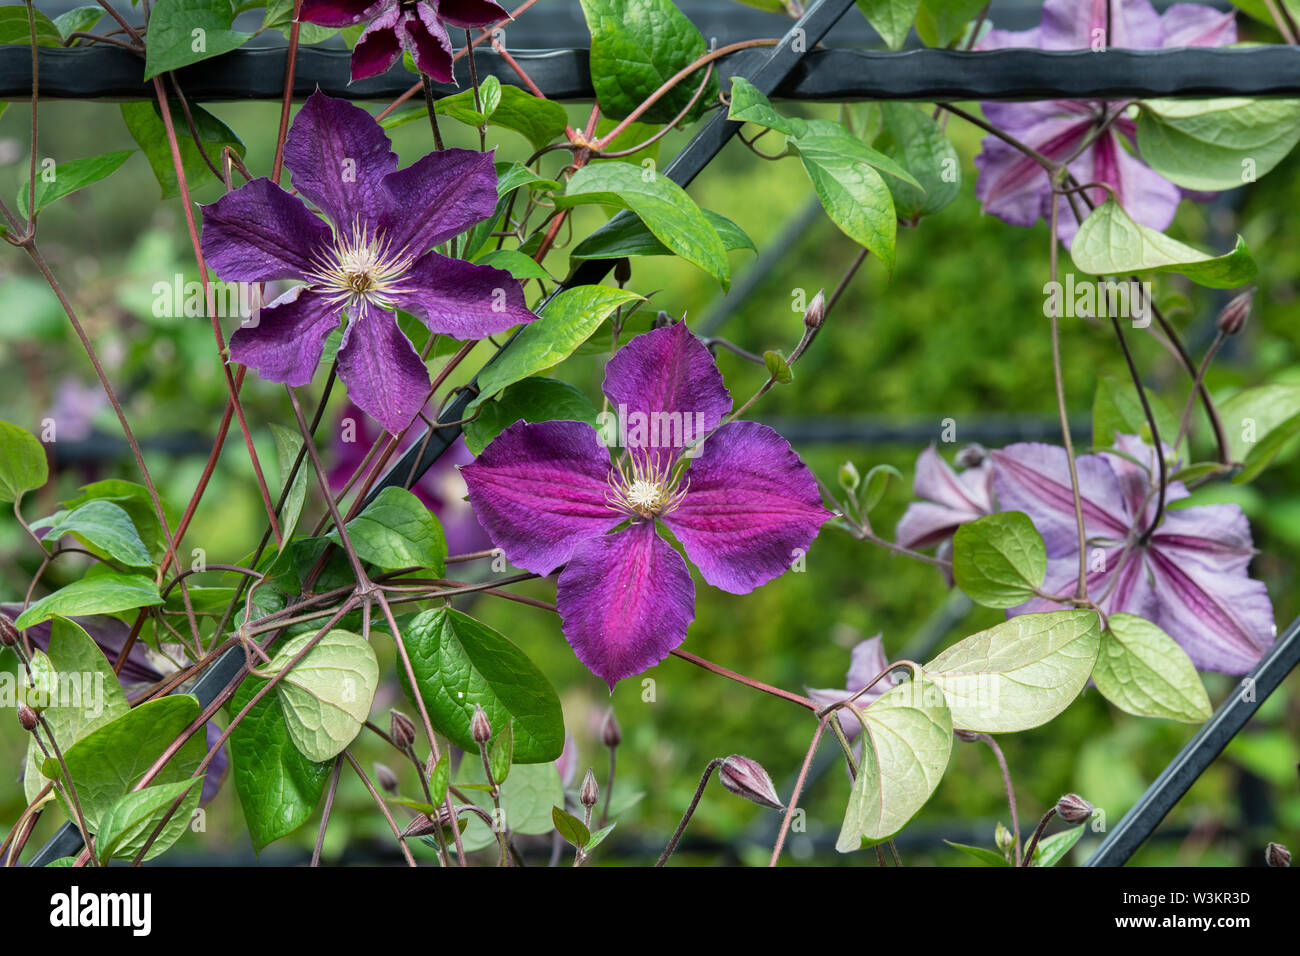 Clematis ‘Star of india’. Late Large-Flowered Clematis Stock Photo